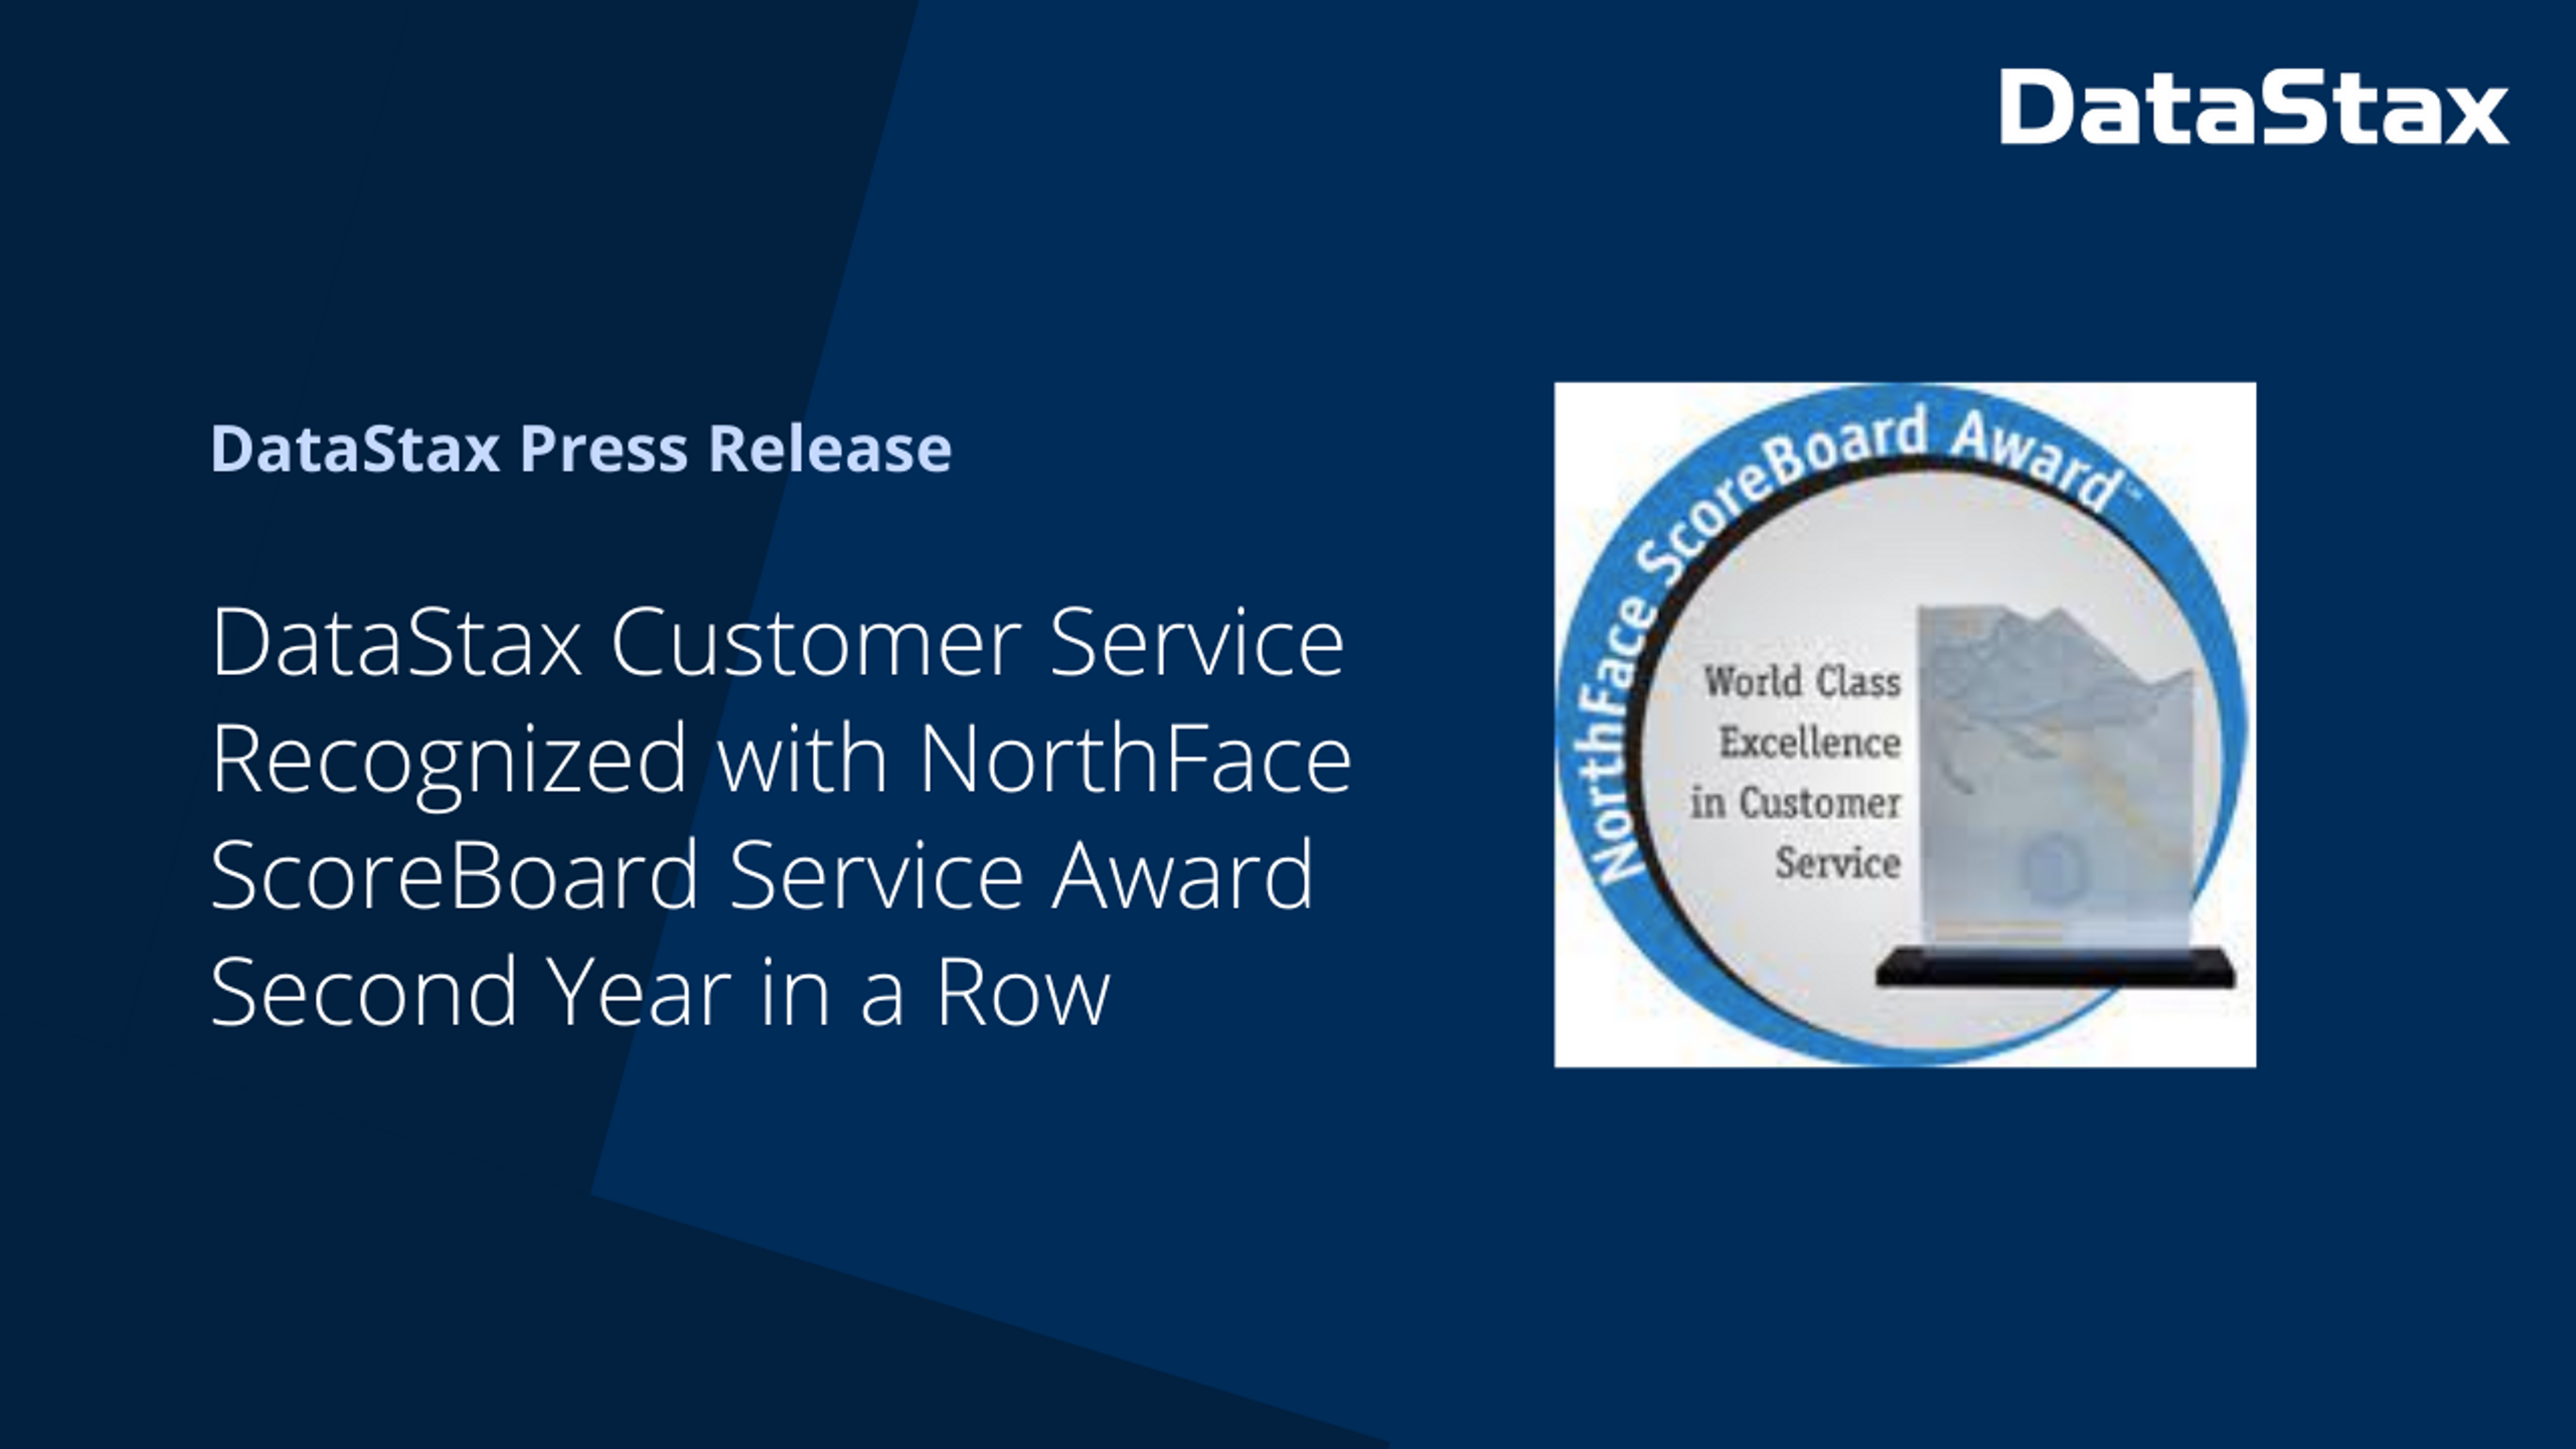 DataStax Customer Service Recognized with NorthFace ScoreBoard Service Award Second Year in a Row